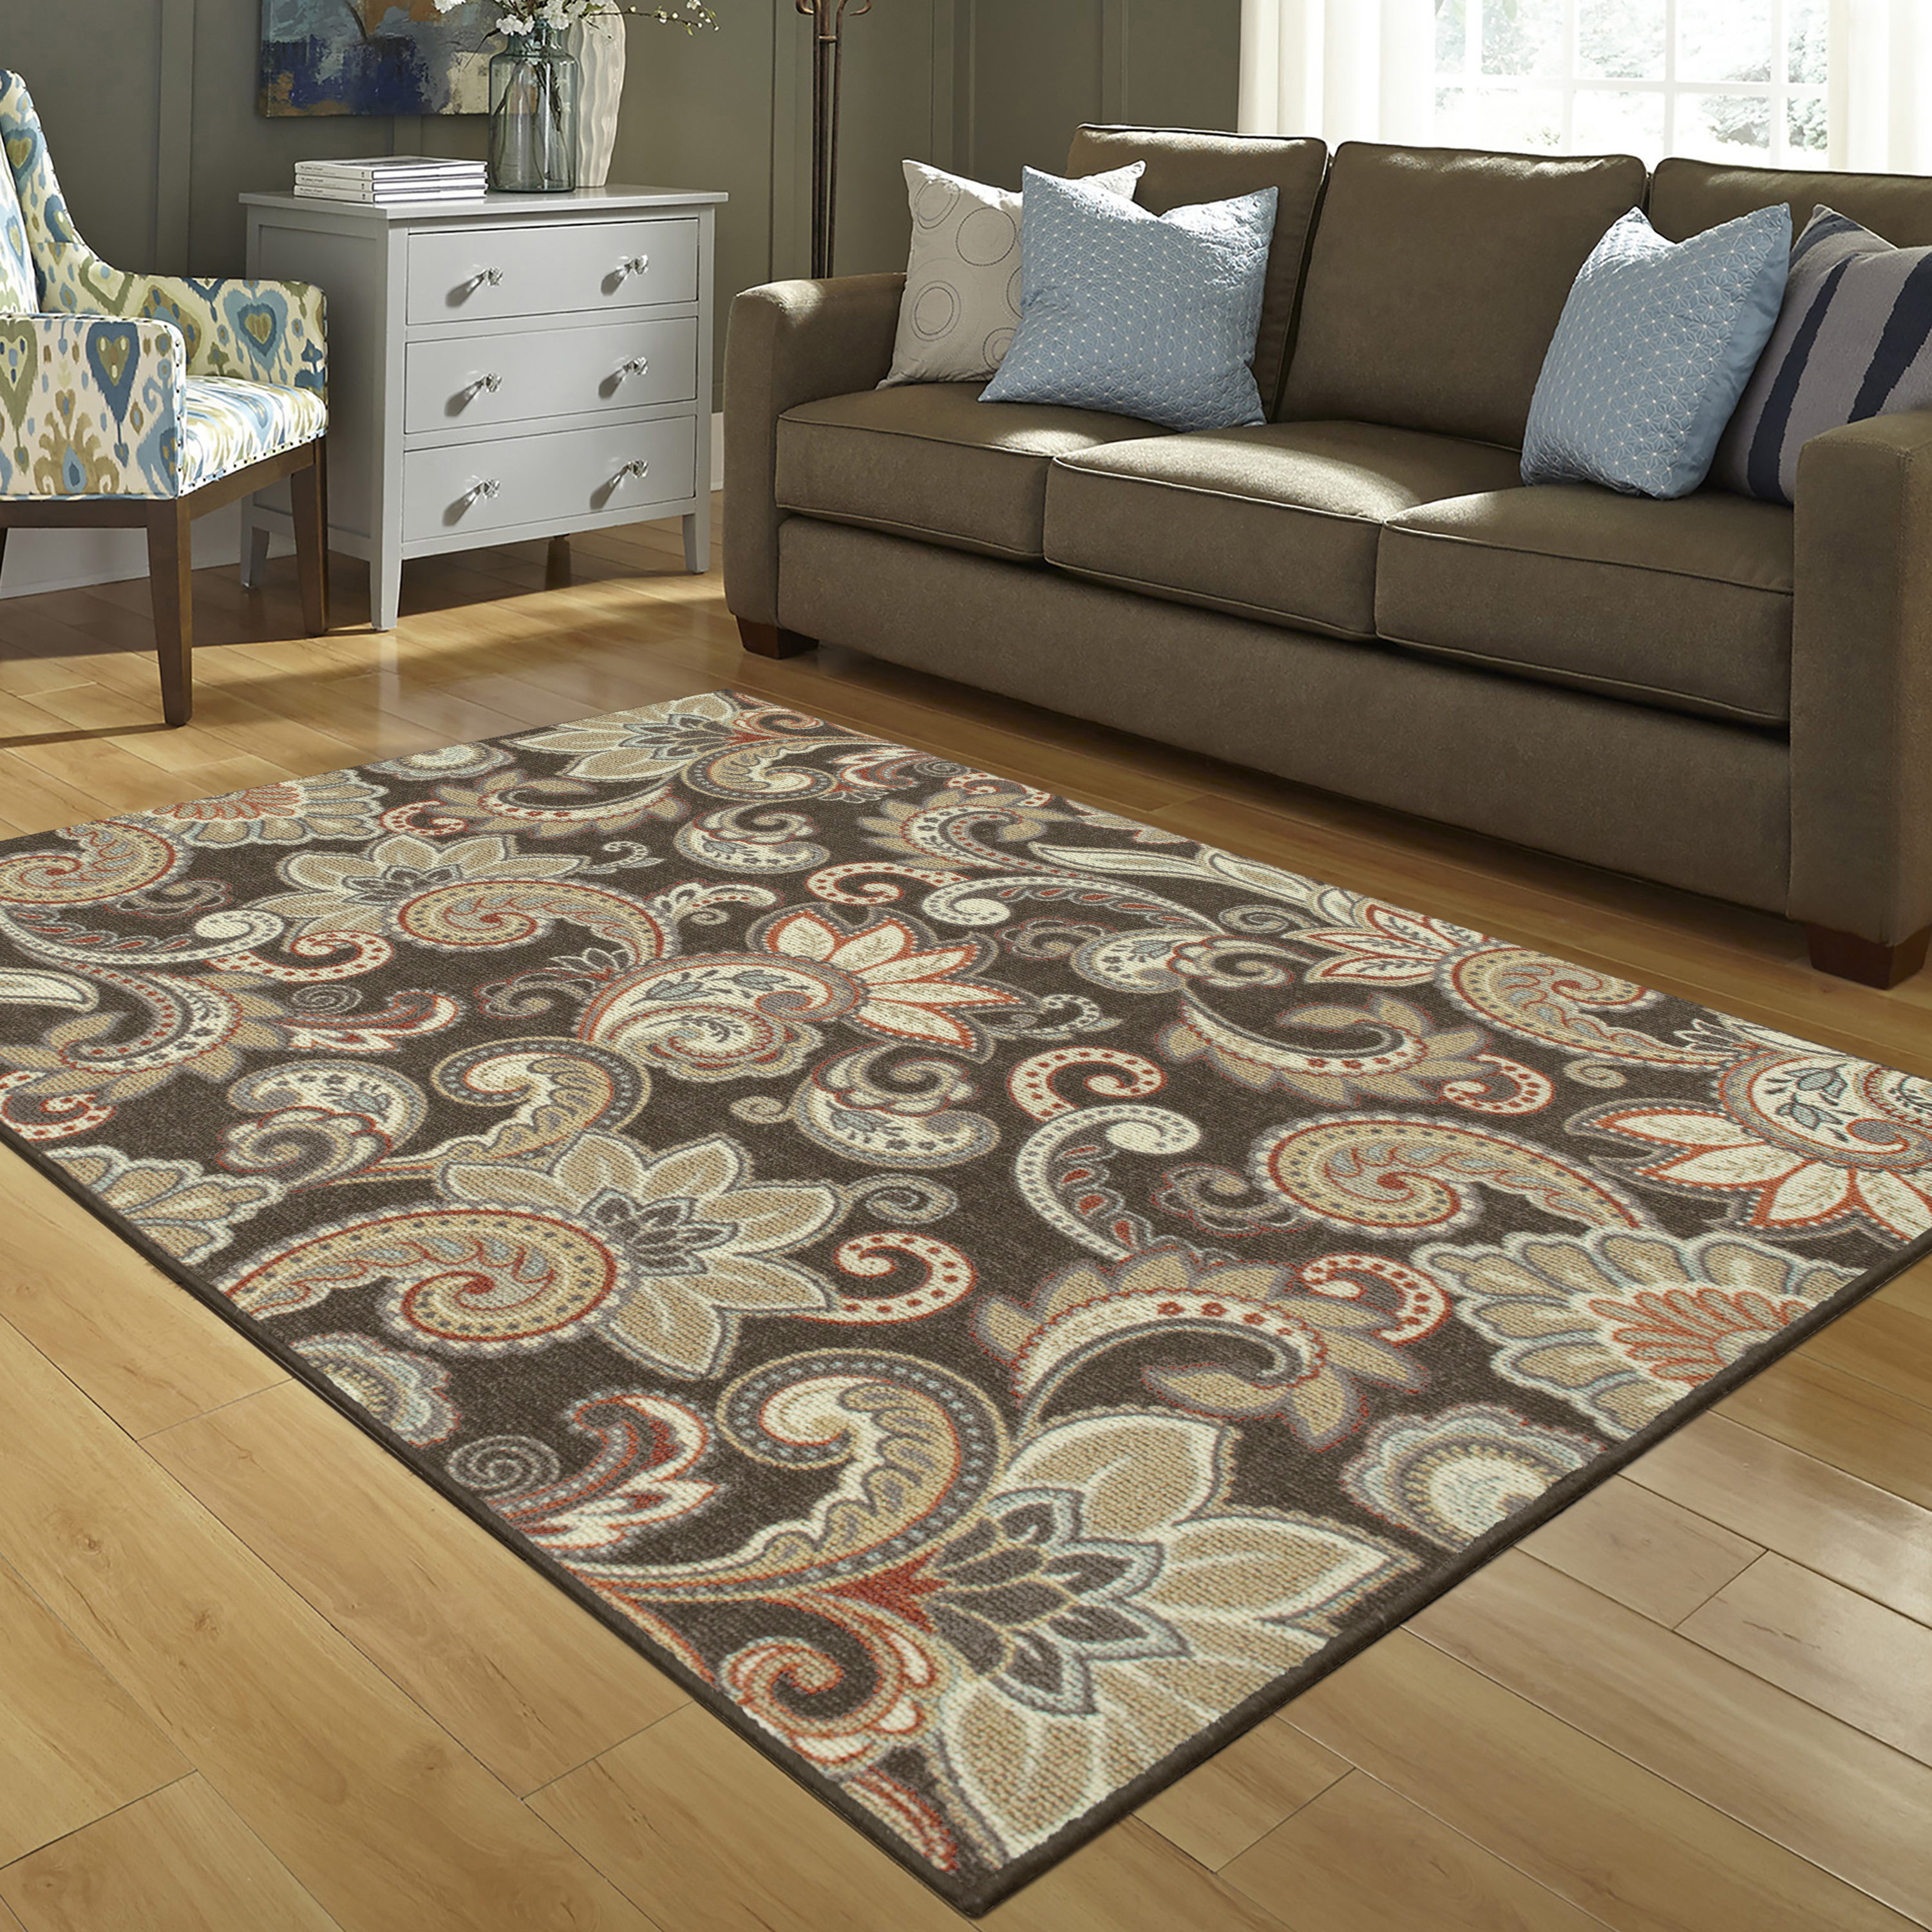 Interior dÉcor with brown area rugs